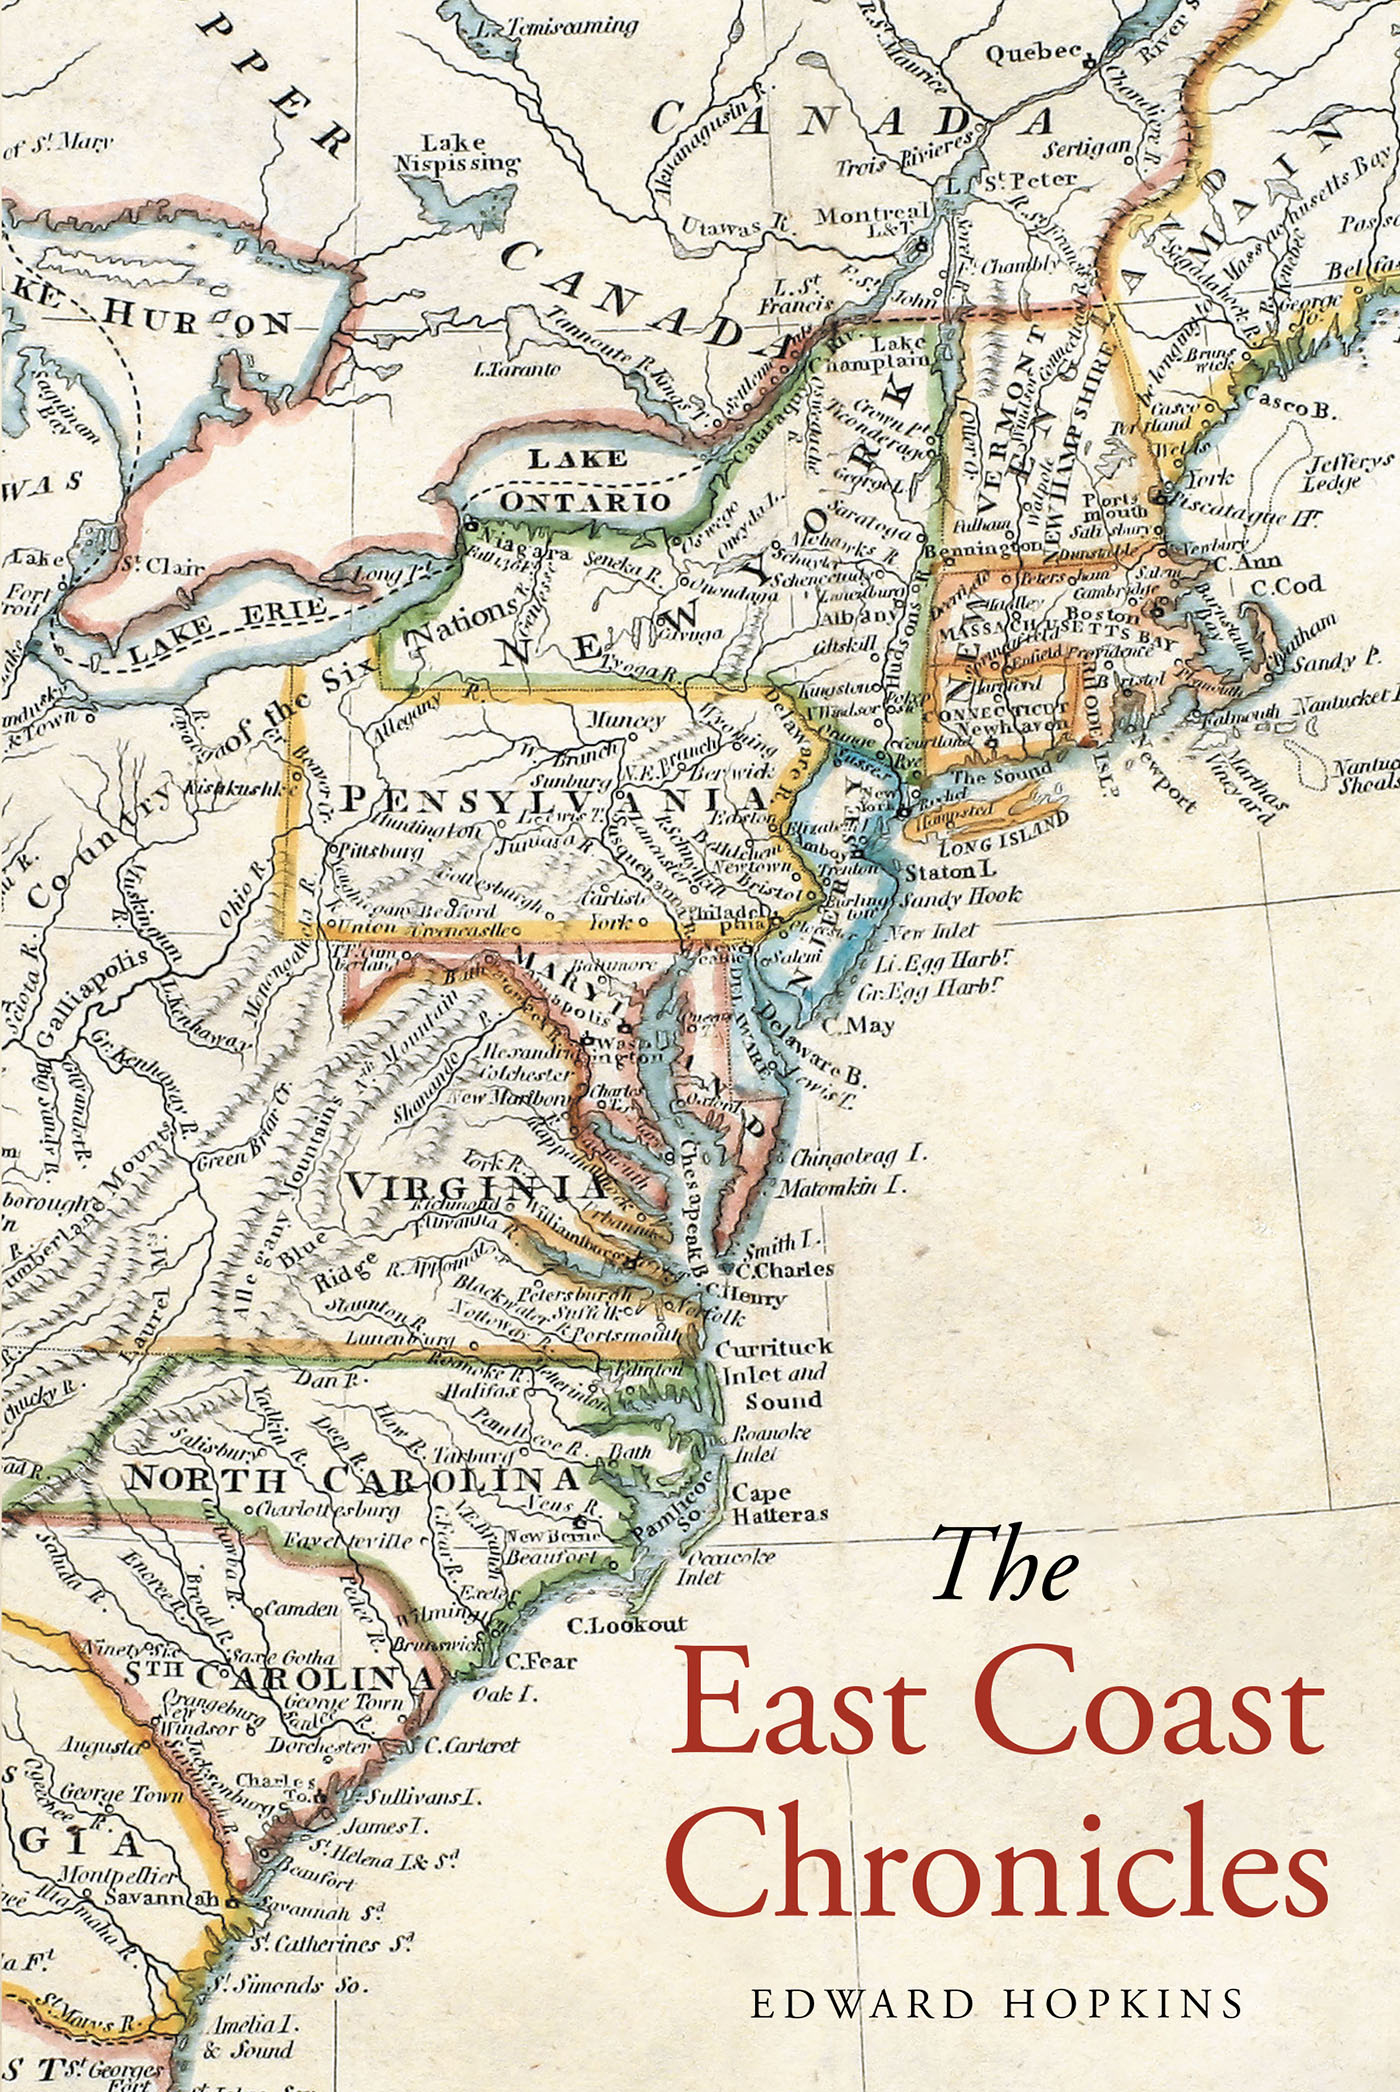 Author Edward Hopkins’s New Book, "The East Coast Chronicles," is a Unique Set of Tales Inspired by the East Coast of America, Exploring the Region and Its History